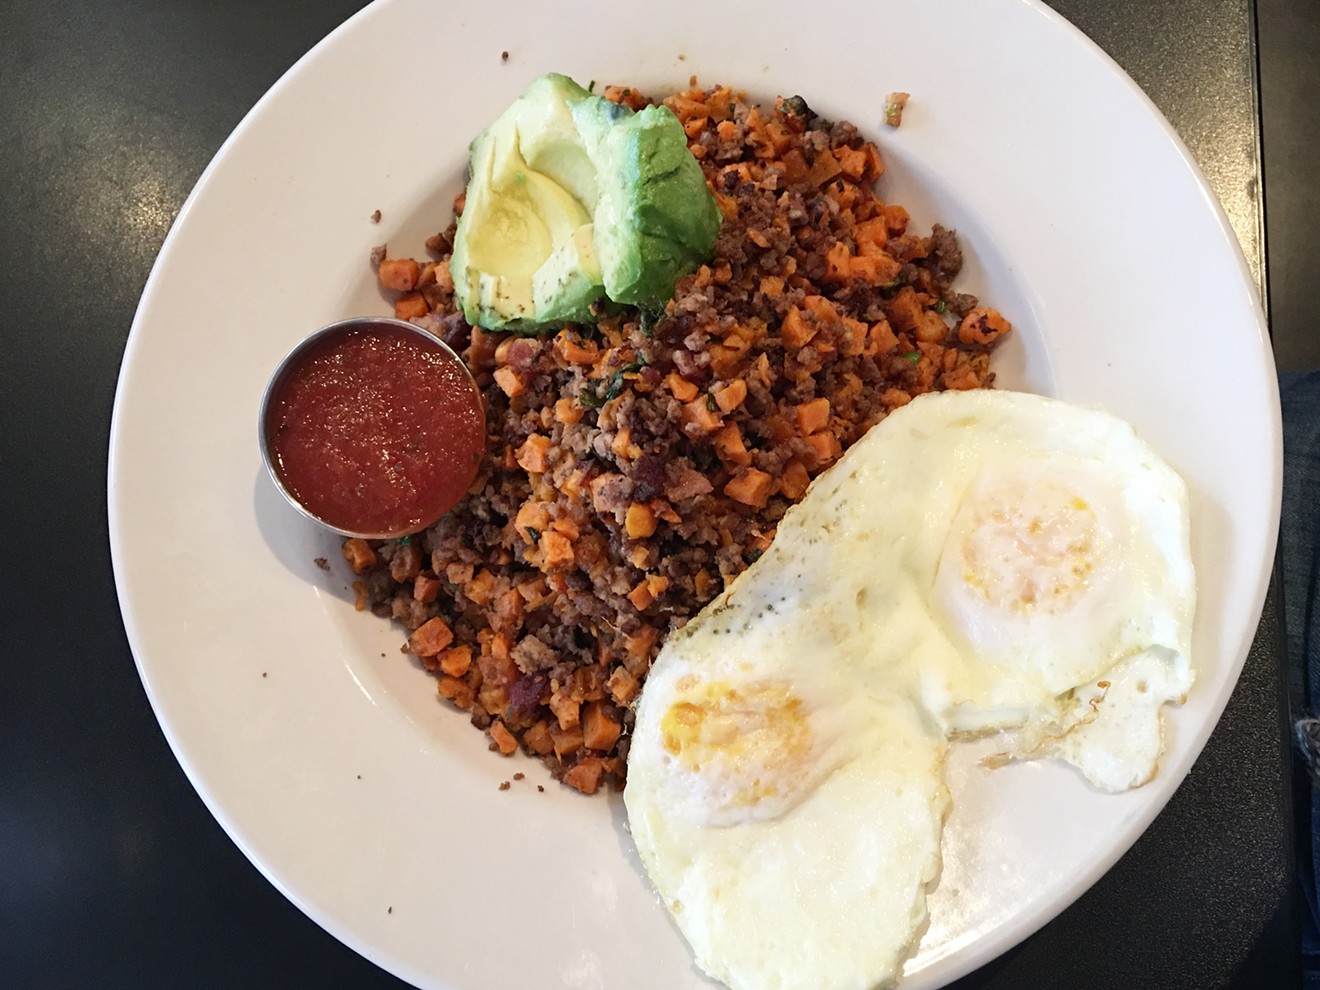 This massive off-menu bowl of sweet potato hash, eggs, avocado and the protein of your choice is a favorite for the paleo-friendly, CrossFitting Dallas protein aficionado.